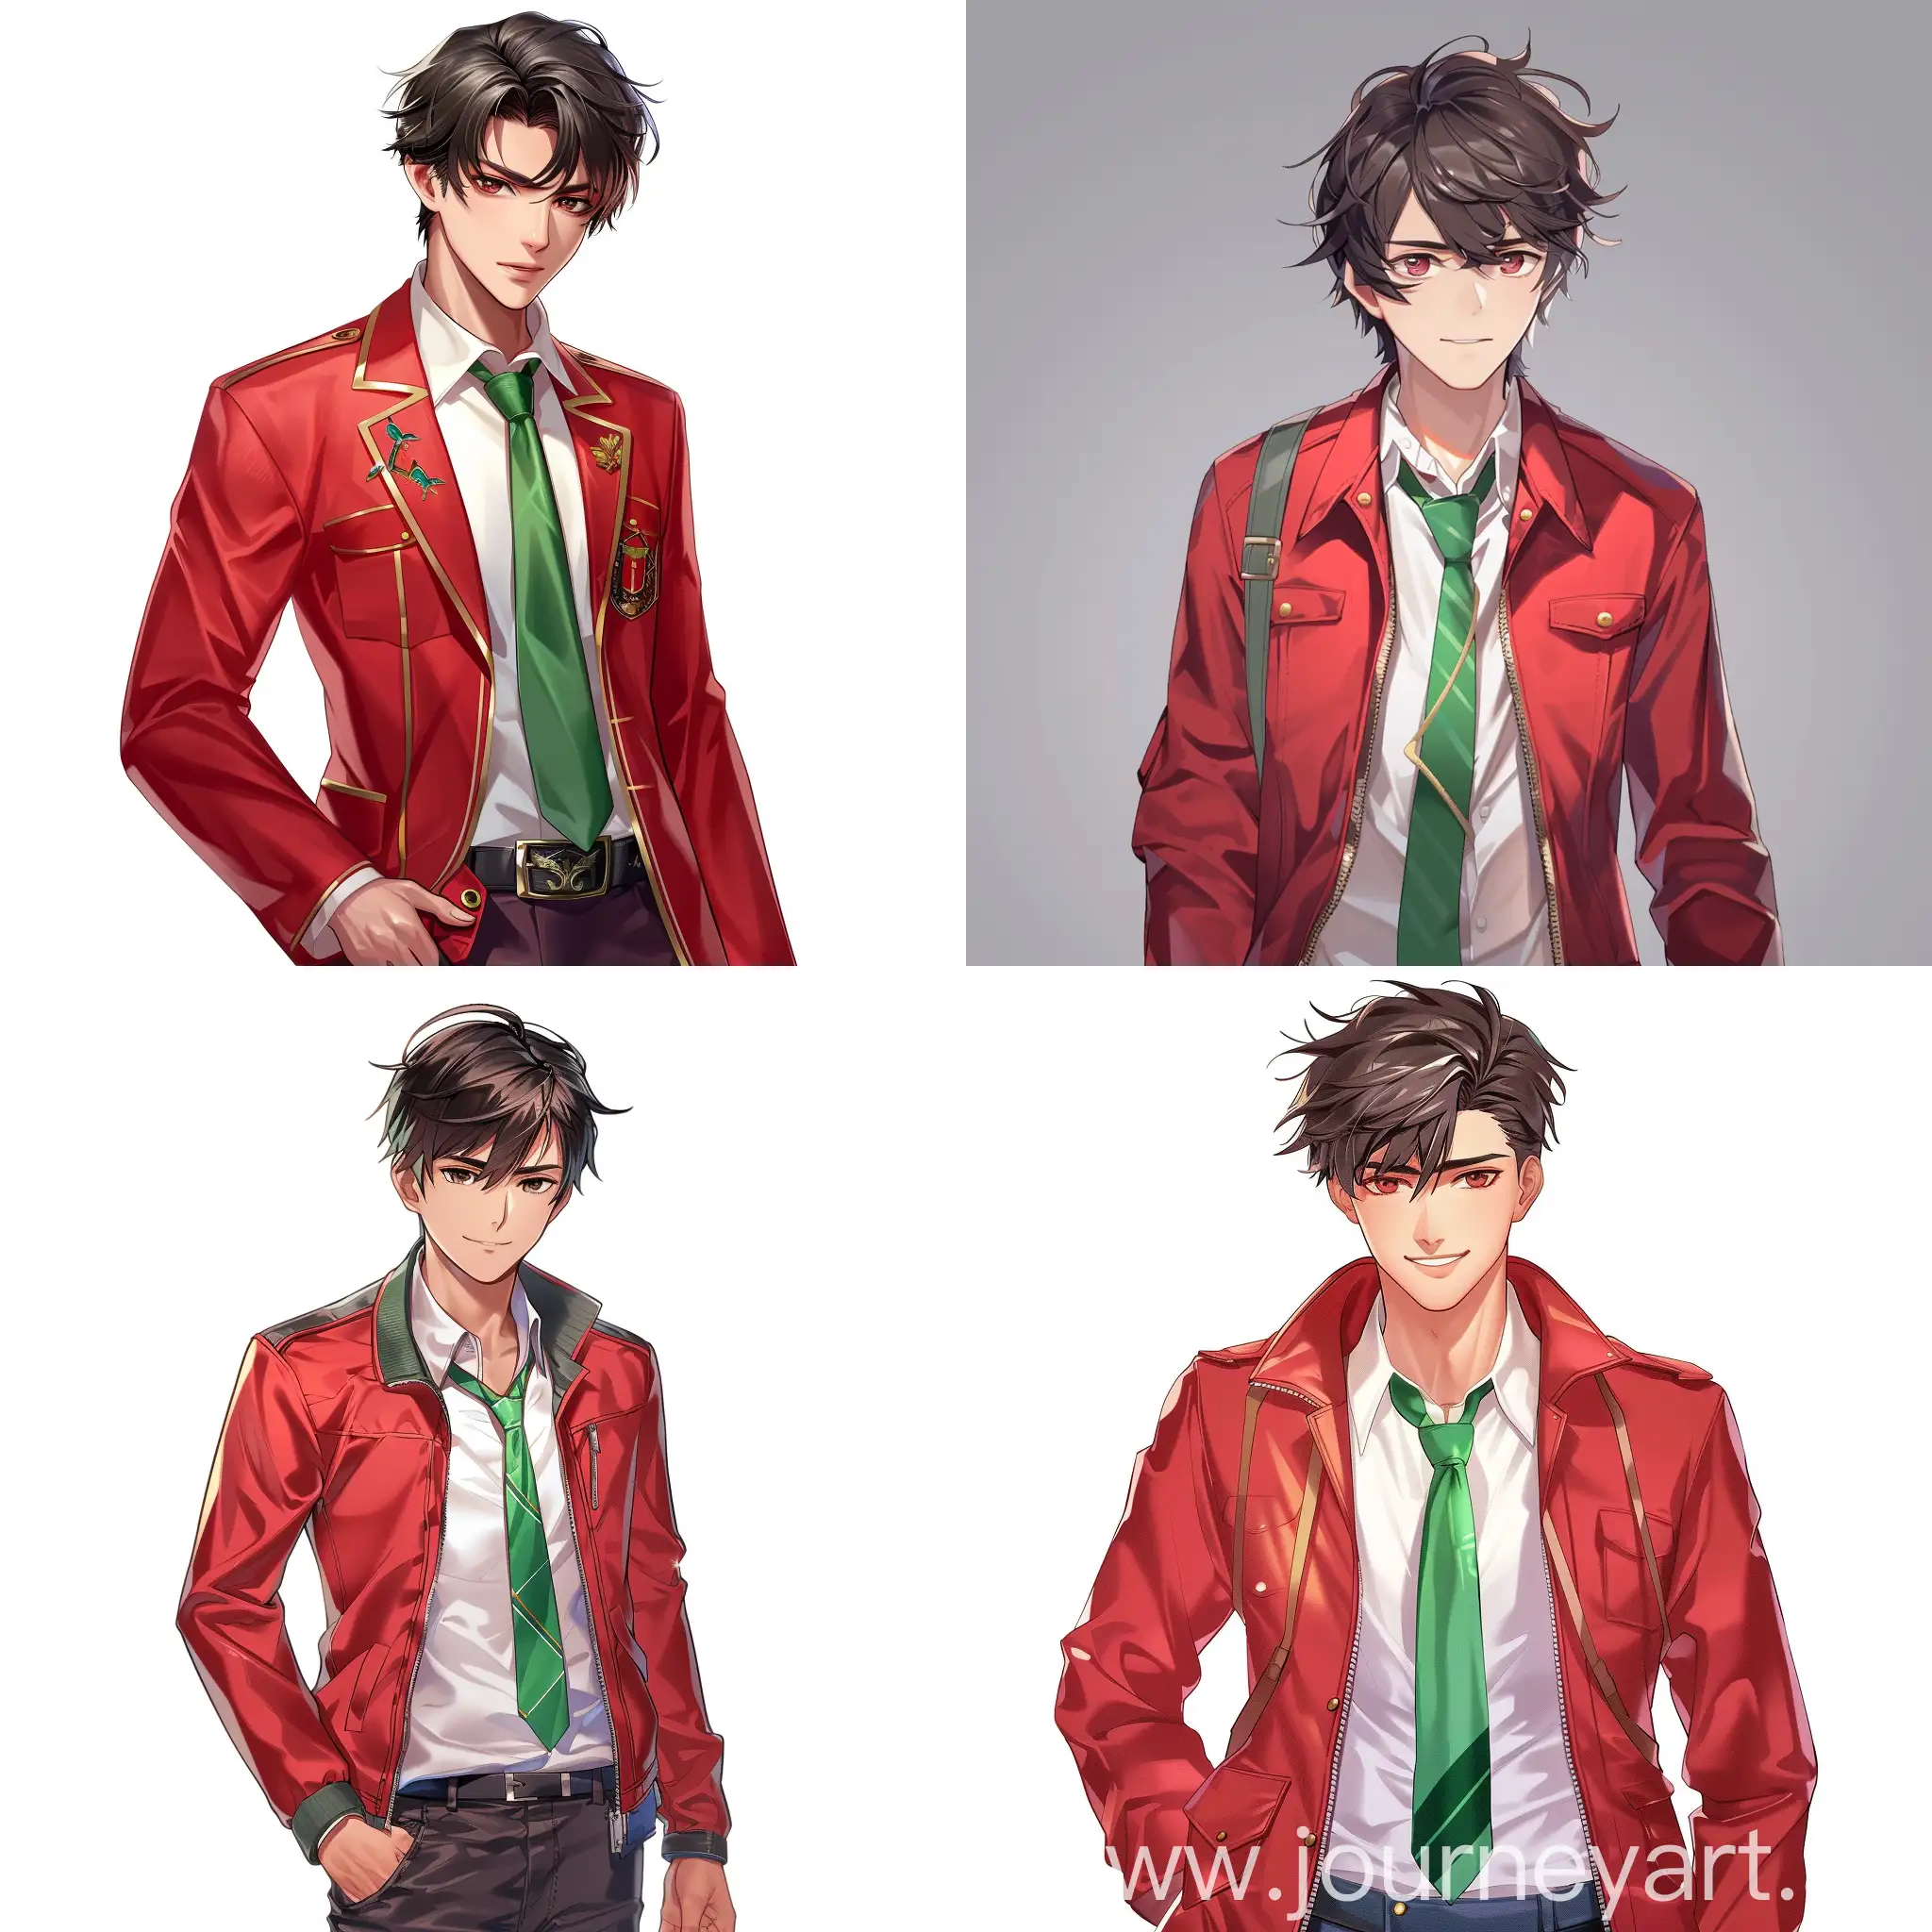 Stylish-Male-Student-in-Classic-Red-Jacket-and-Green-Tie-Visual-Novel-Style-Portrait